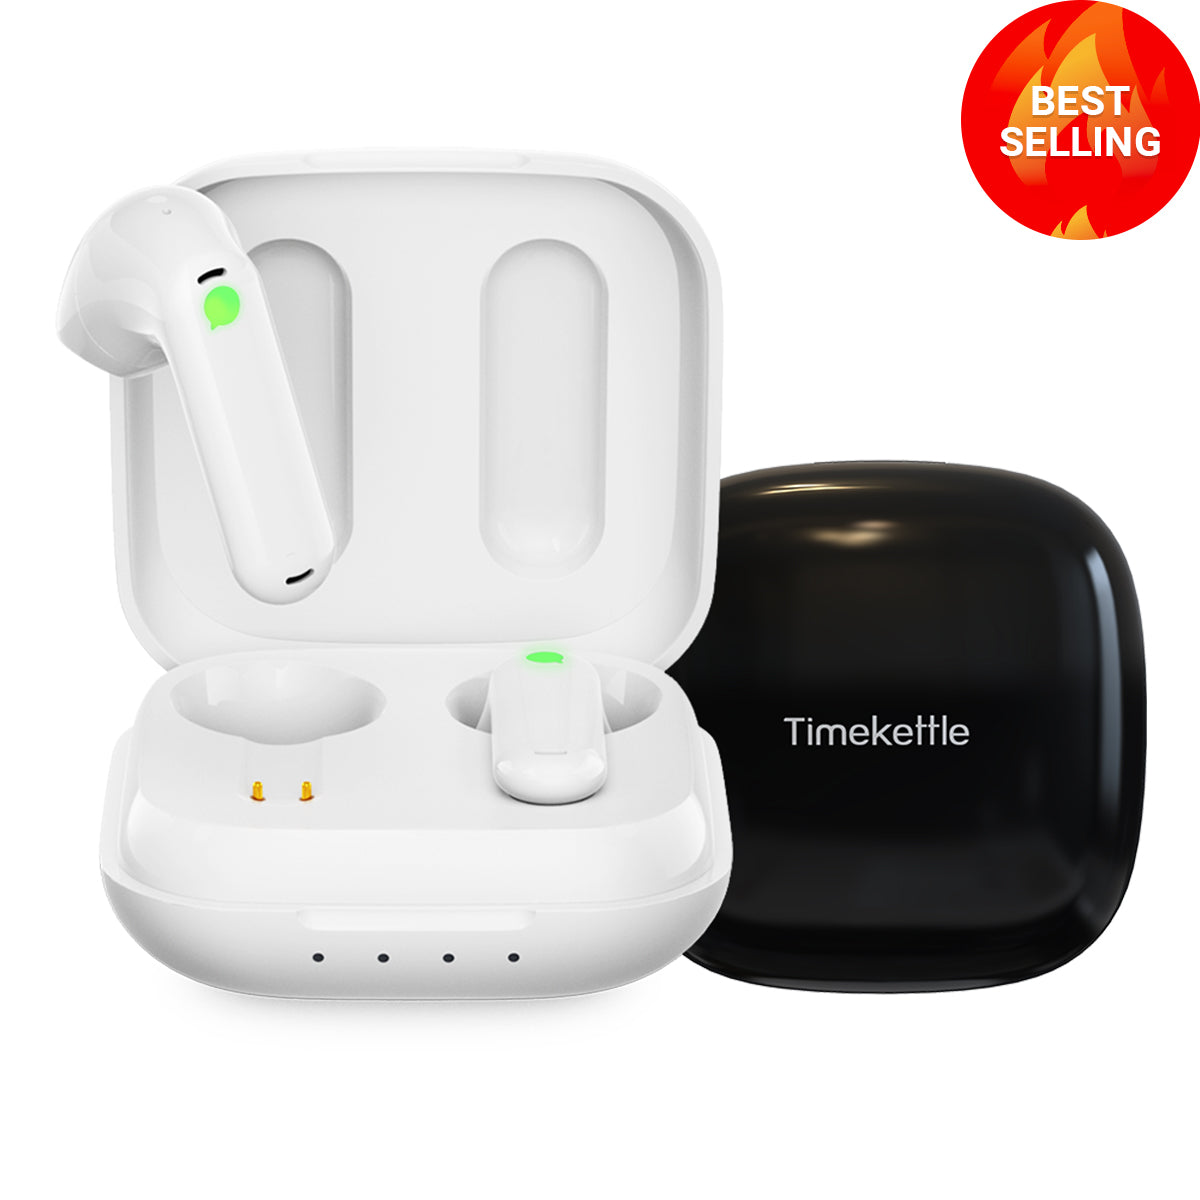  Timekettle WT2 Edge/W3 Translator Device-Bidirection  Simultaneous Translation, Language Translator Device with 40 Languages & 93  Accent Online,Offline Translator Earbuds with APP Fit for iOS & Android :  Office Products